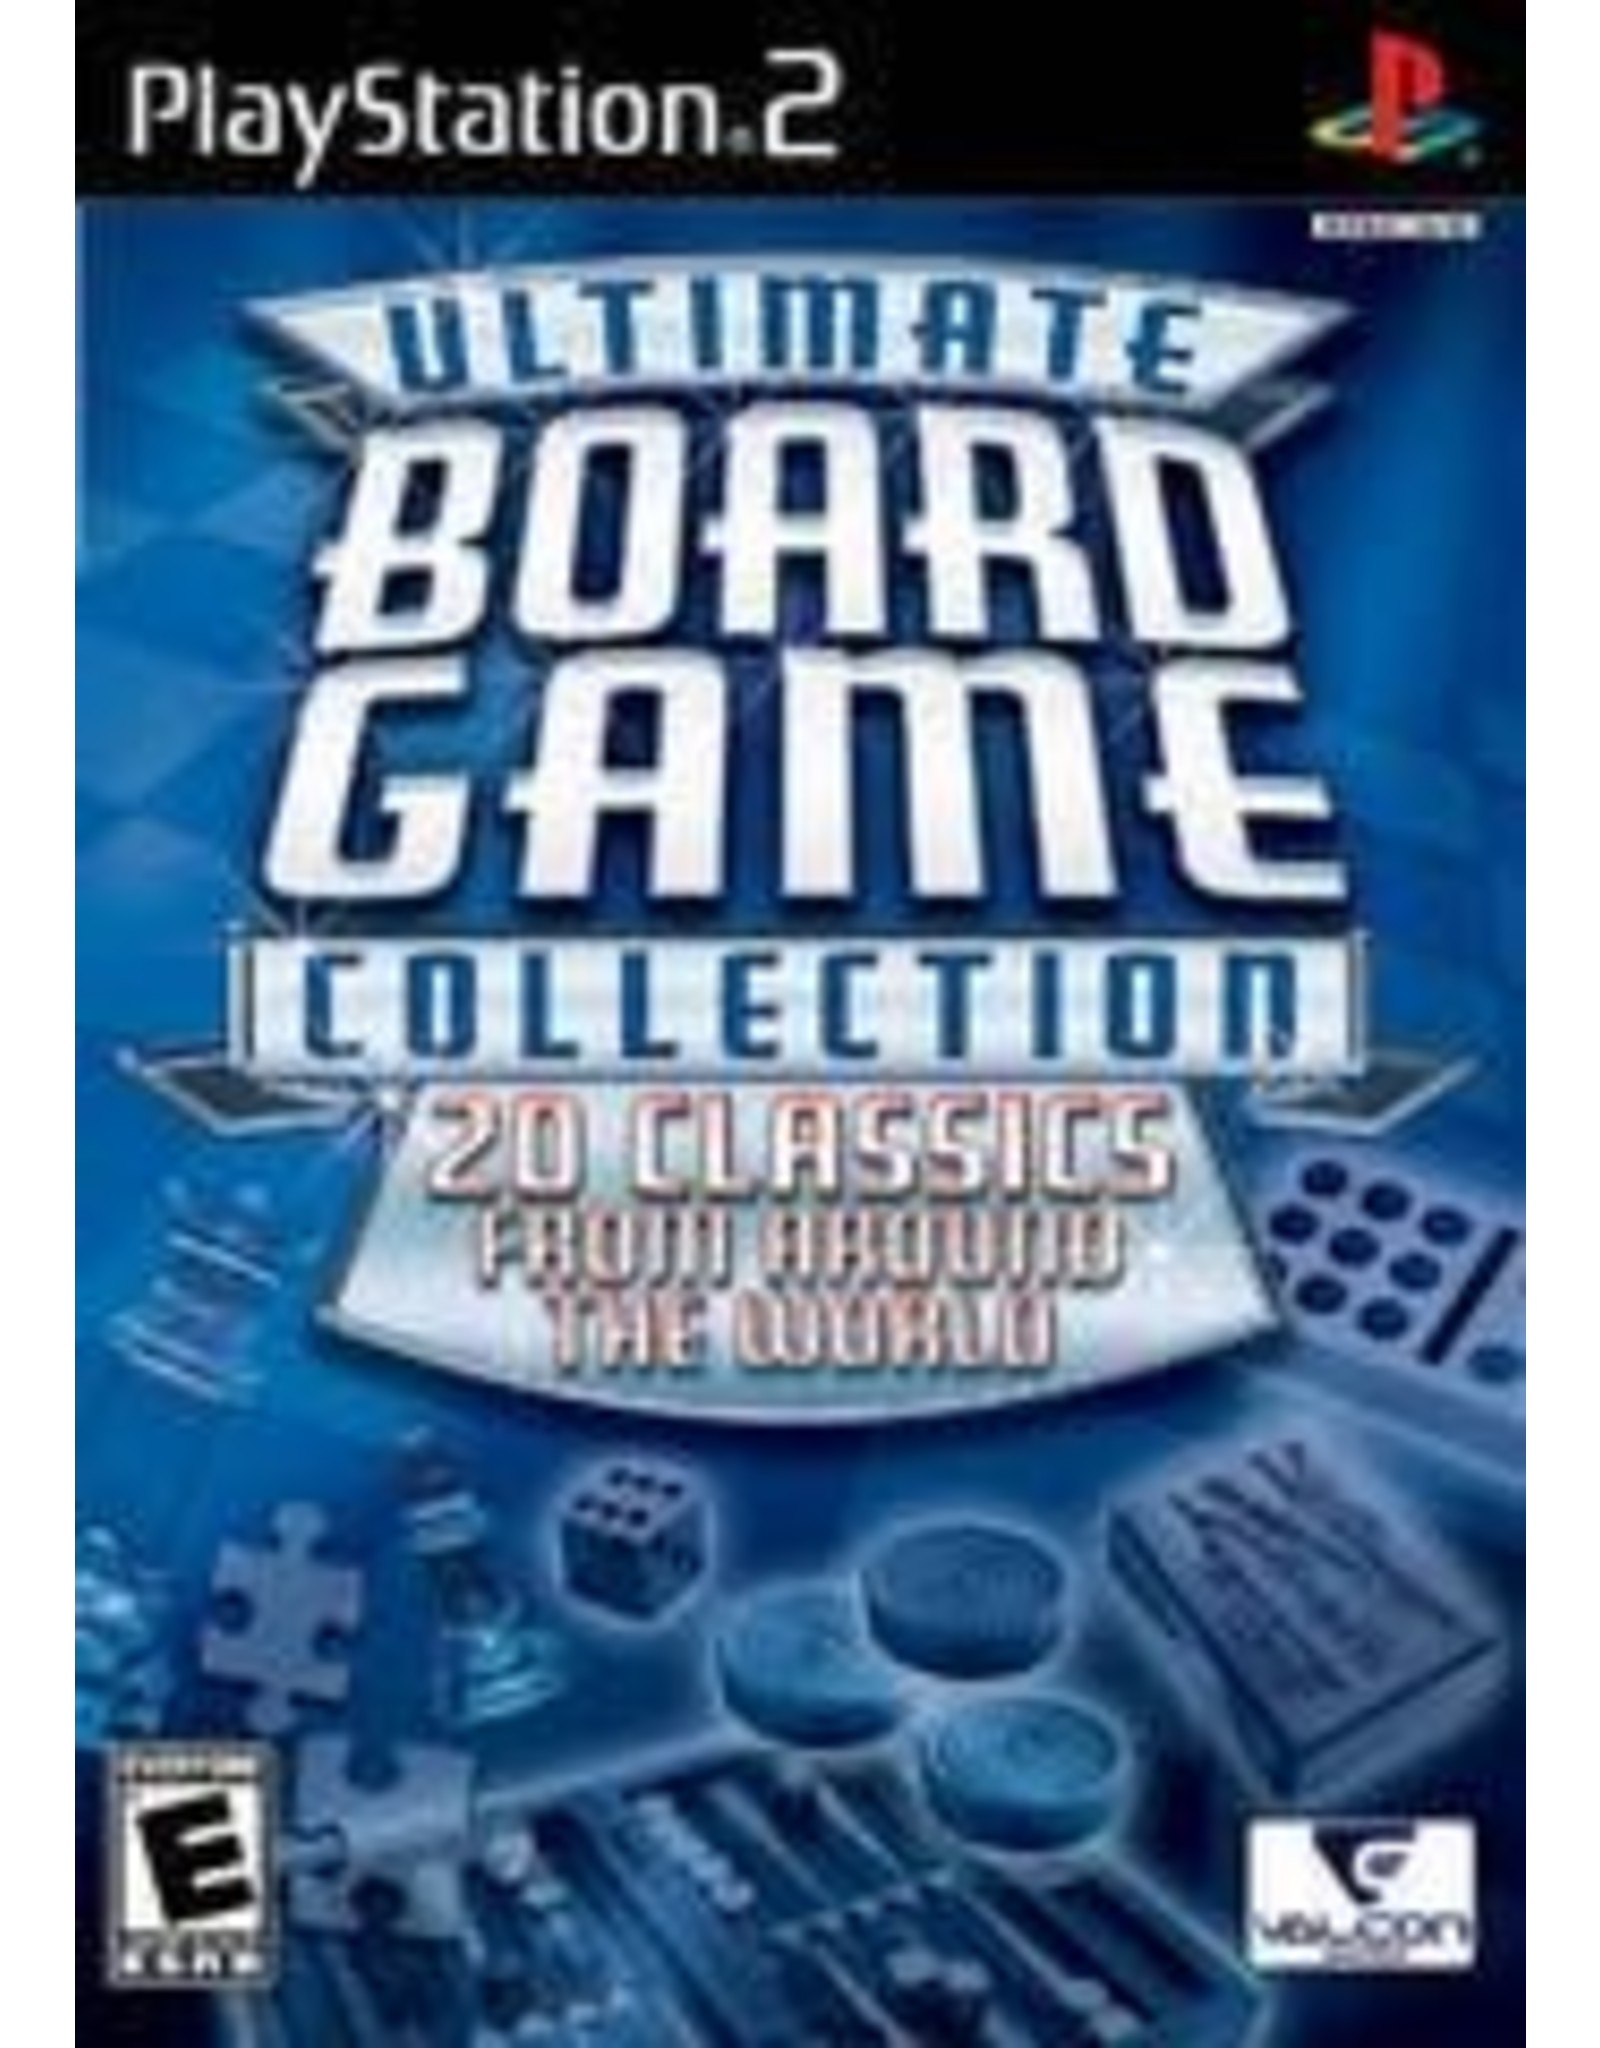 Playstation 2 Ultimate Board Game Collection (CiB)